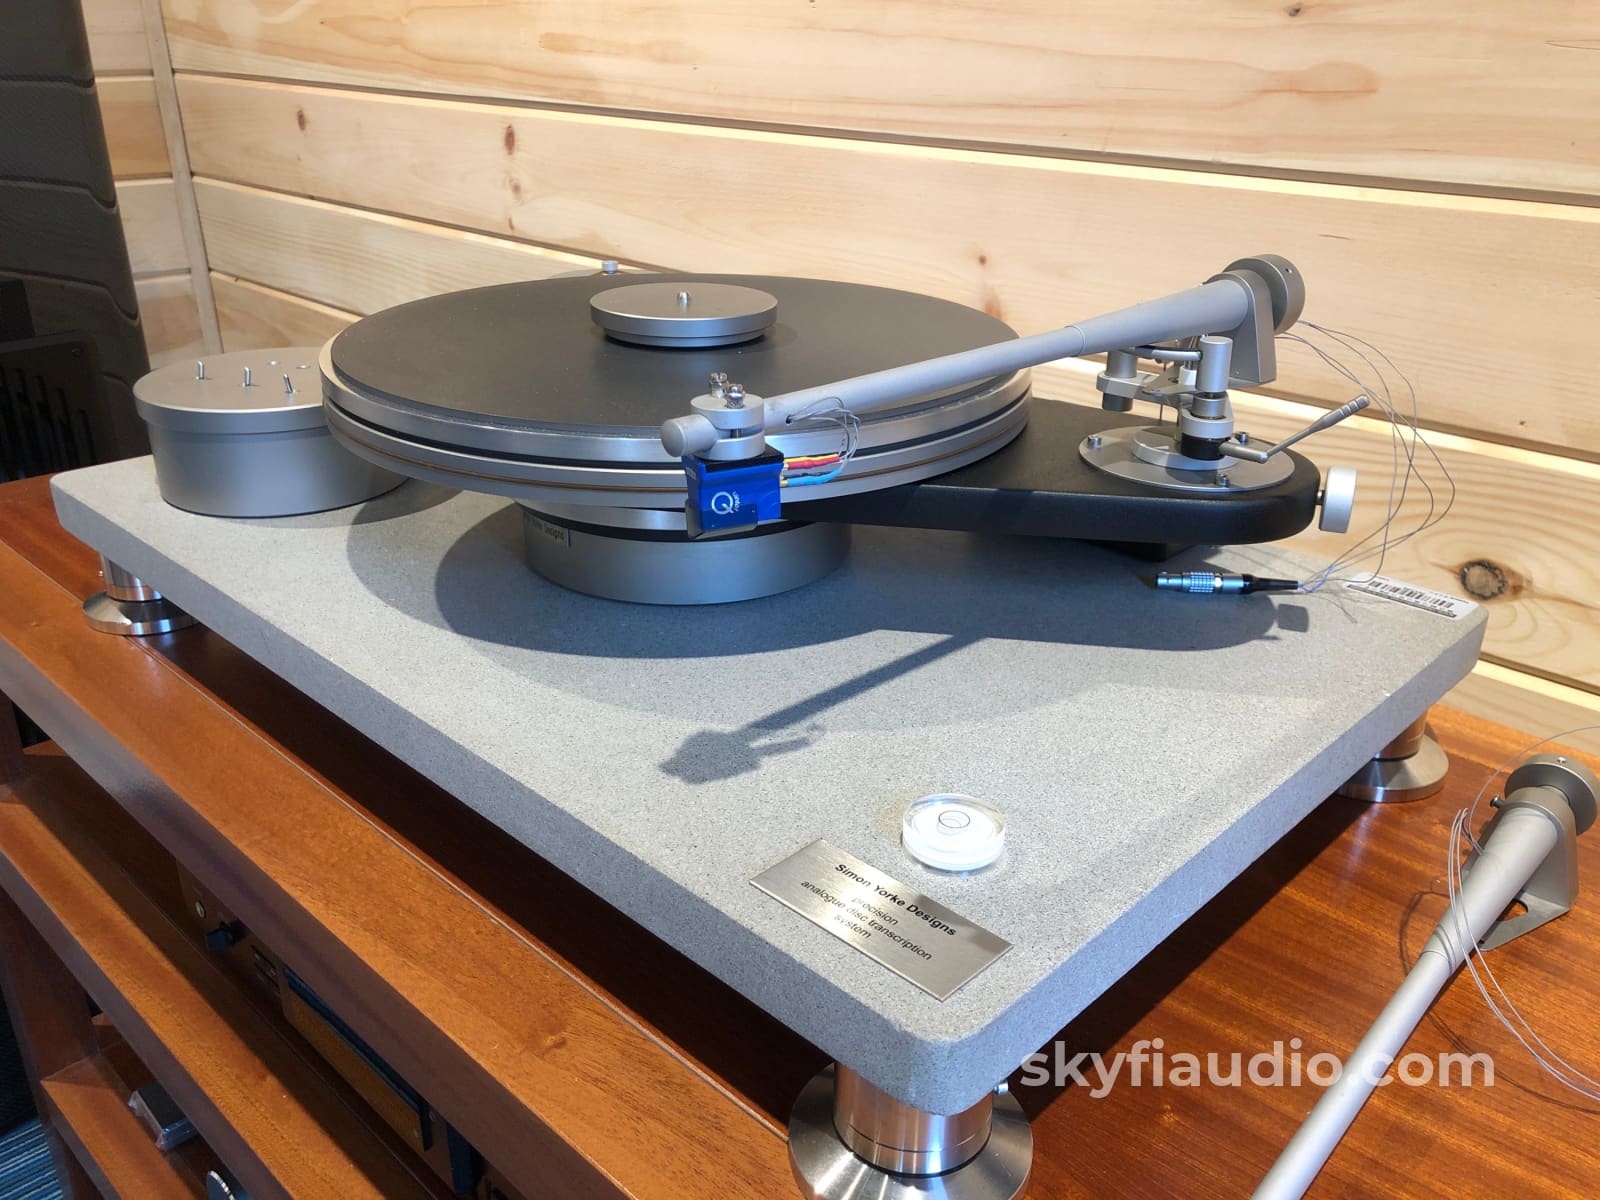 Simon Yorke Designs Model 10 Turntable With Two Tonearms + Wands Upgrades